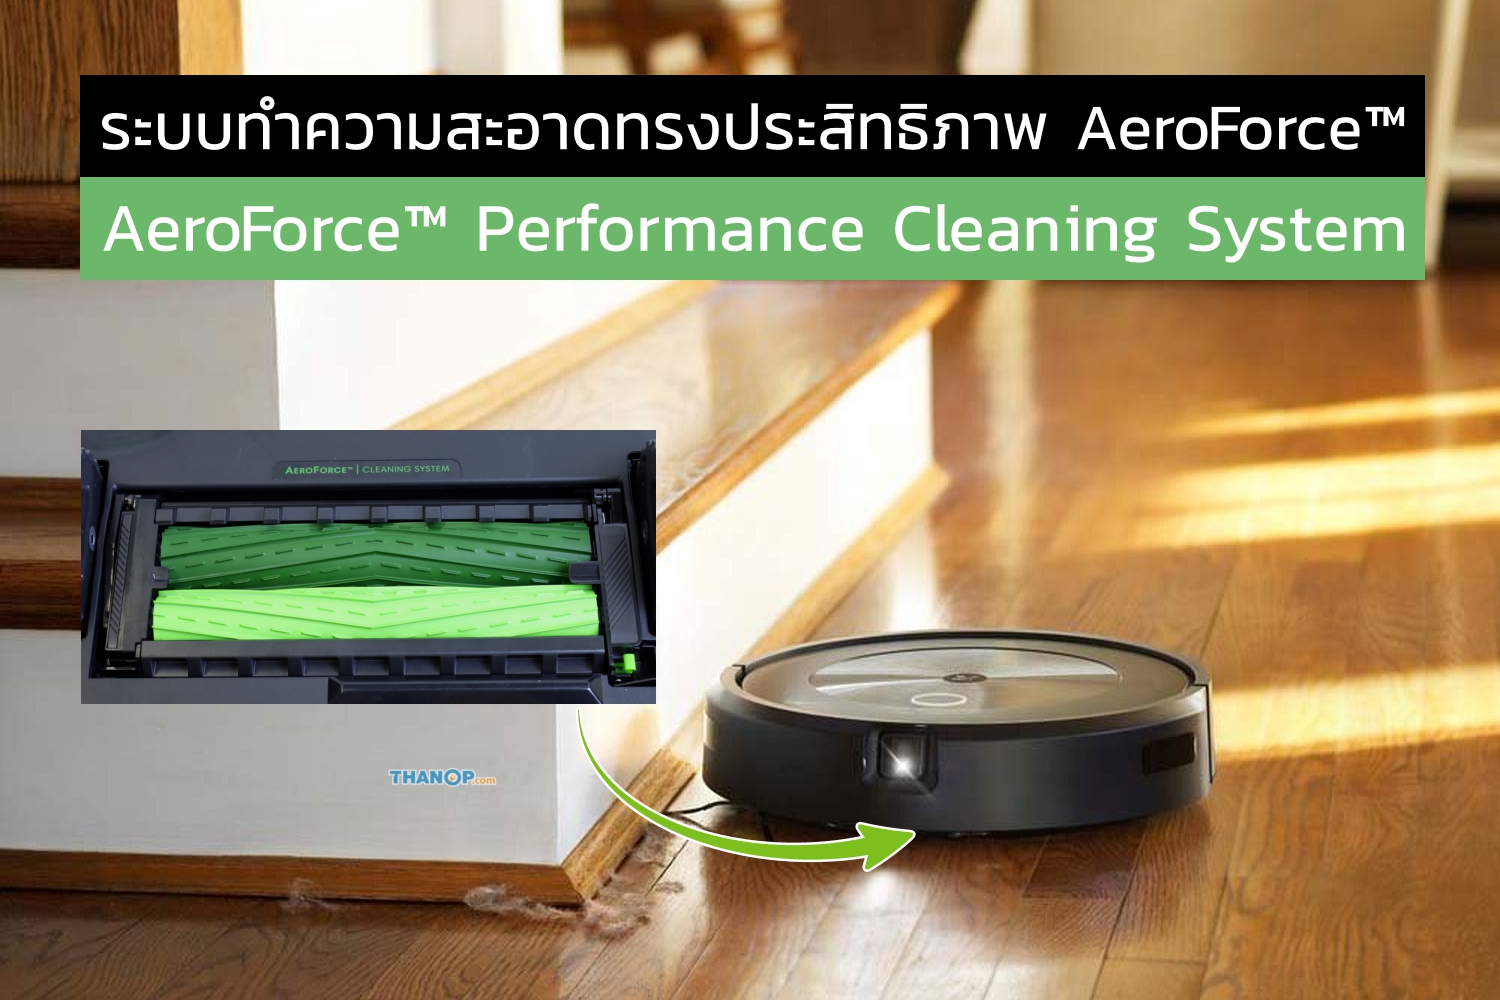 irobot-roomba-j7-plus-feature-aeroforce-performance-cleaning-system